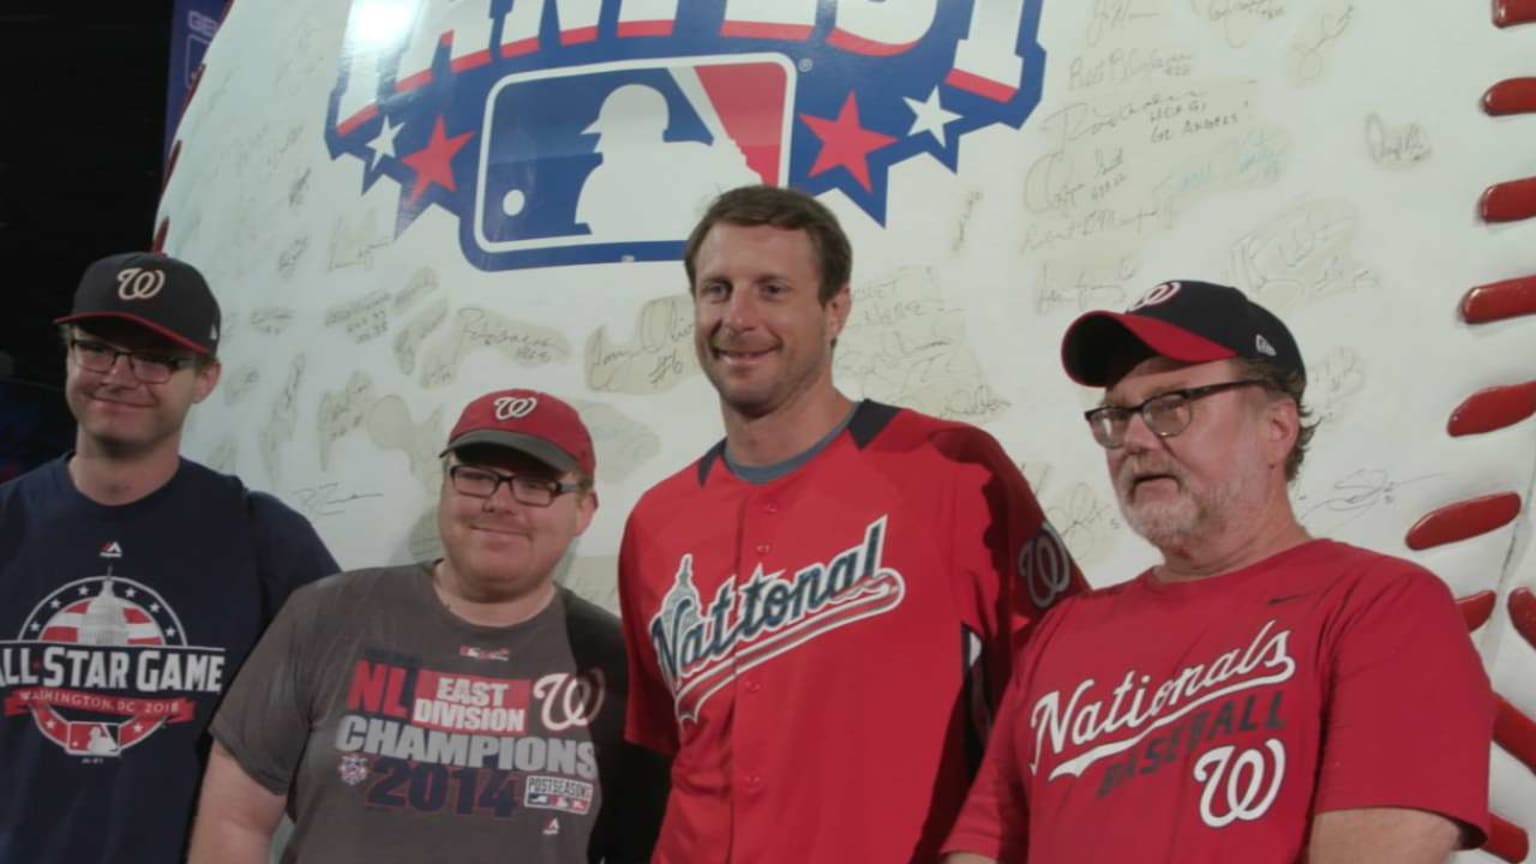 What would Ahmed, Shawn and Bill look like with Max Scherzer's eyes?